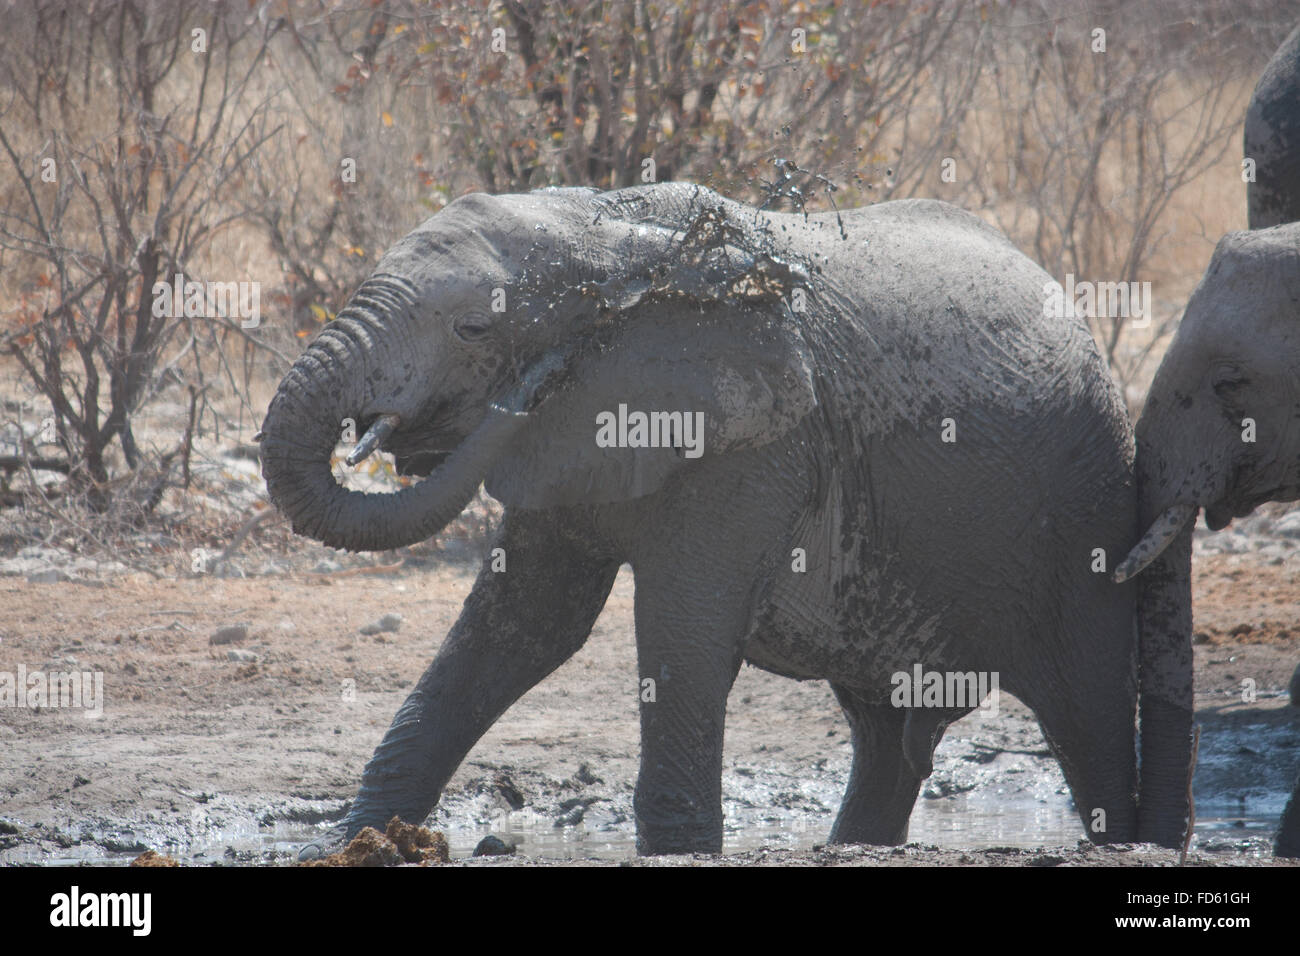 Elephant Pouring Water From Its Trunk Stock Photo